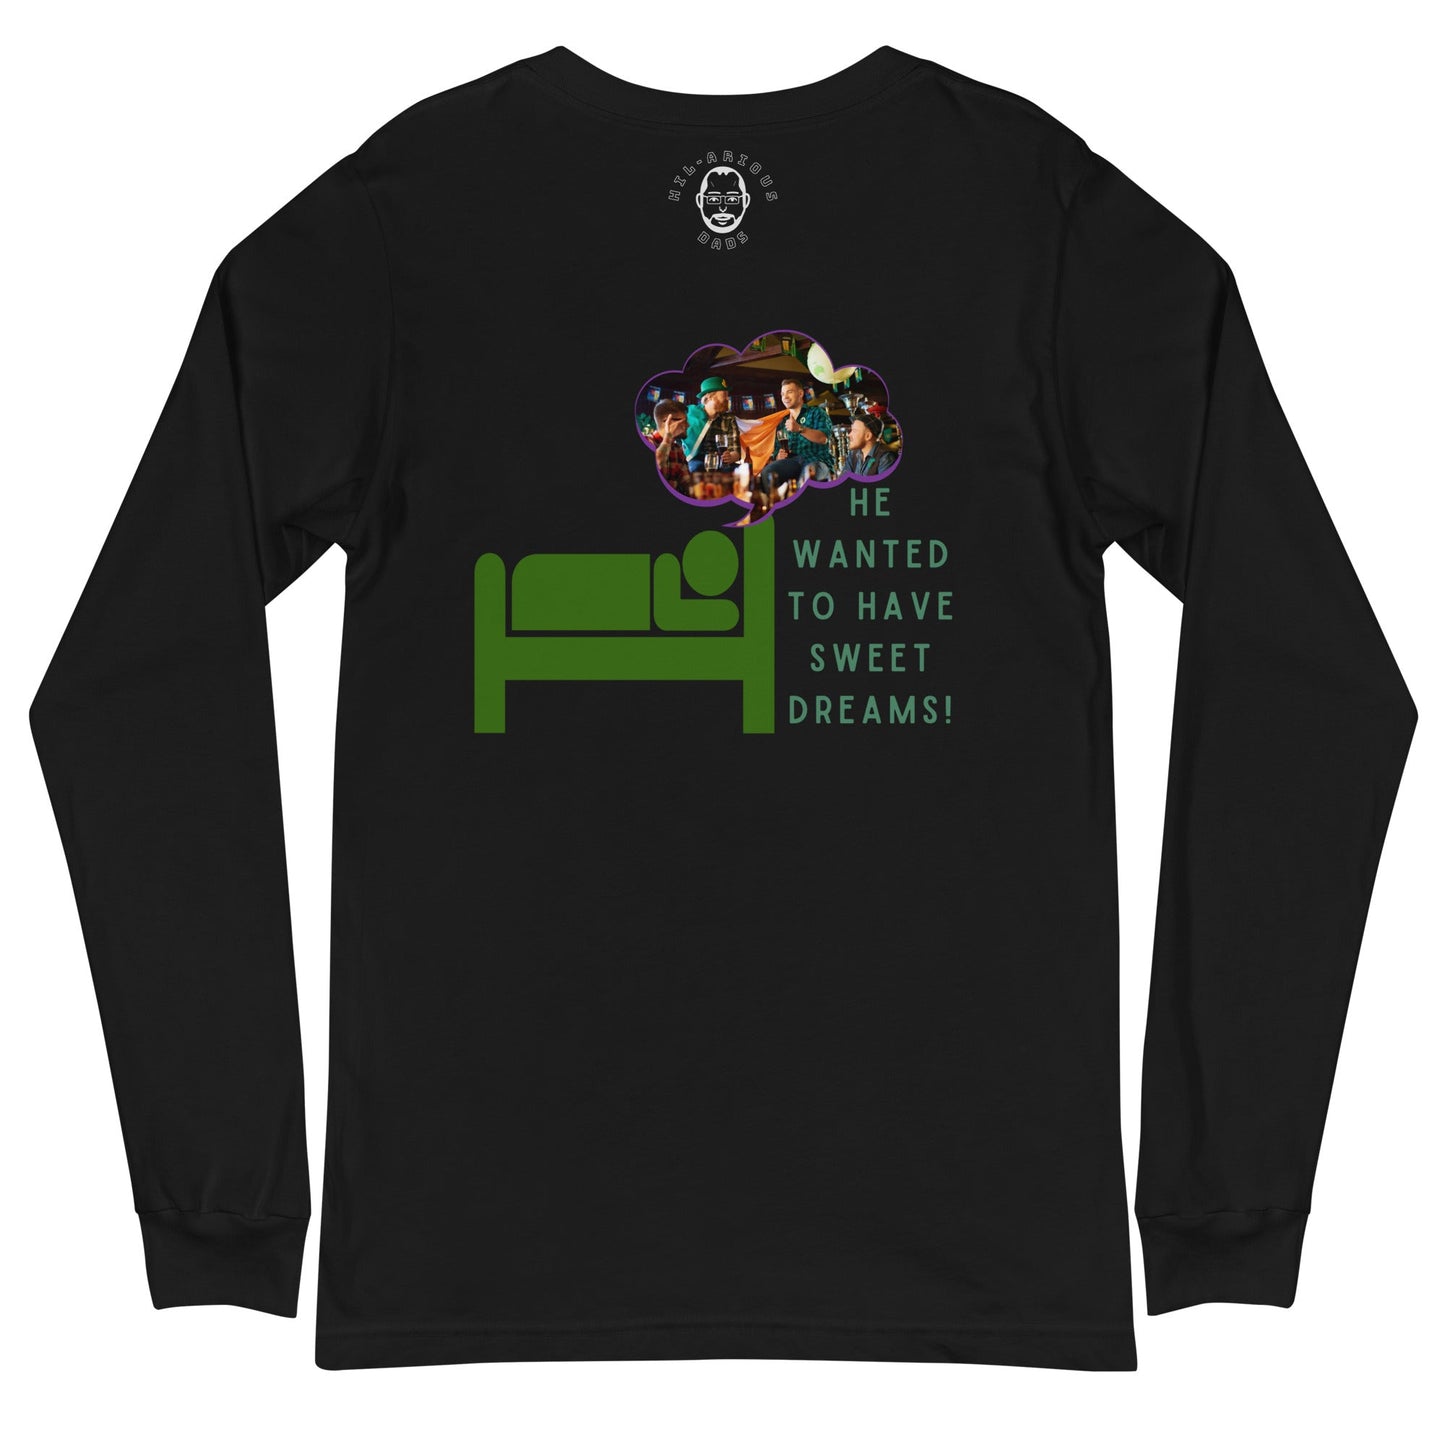 Why did the Irishman put sugar on his pillow?-Long Sleeve Tee - Hil-arious Dads